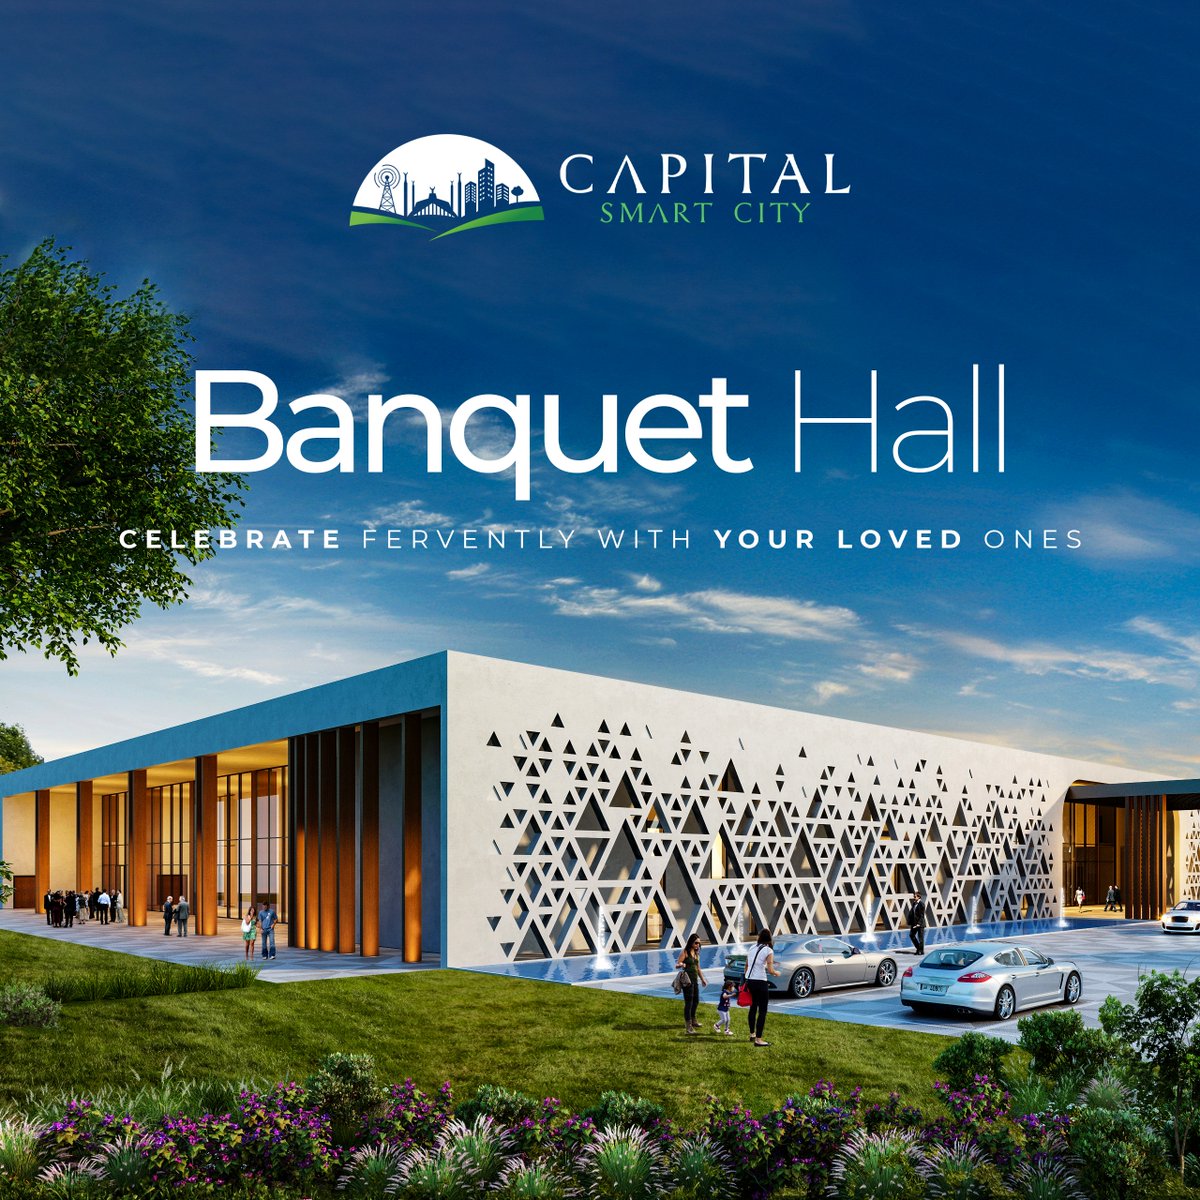 At Capital Smart City, we understand the essence of celebrations, and our Banquet Halls stand as a testament to our commitment to making your occasions truly remarkable. Celebrate fervently with your loved ones in an ambiance that mirrors the grandeur of your joyous moments.